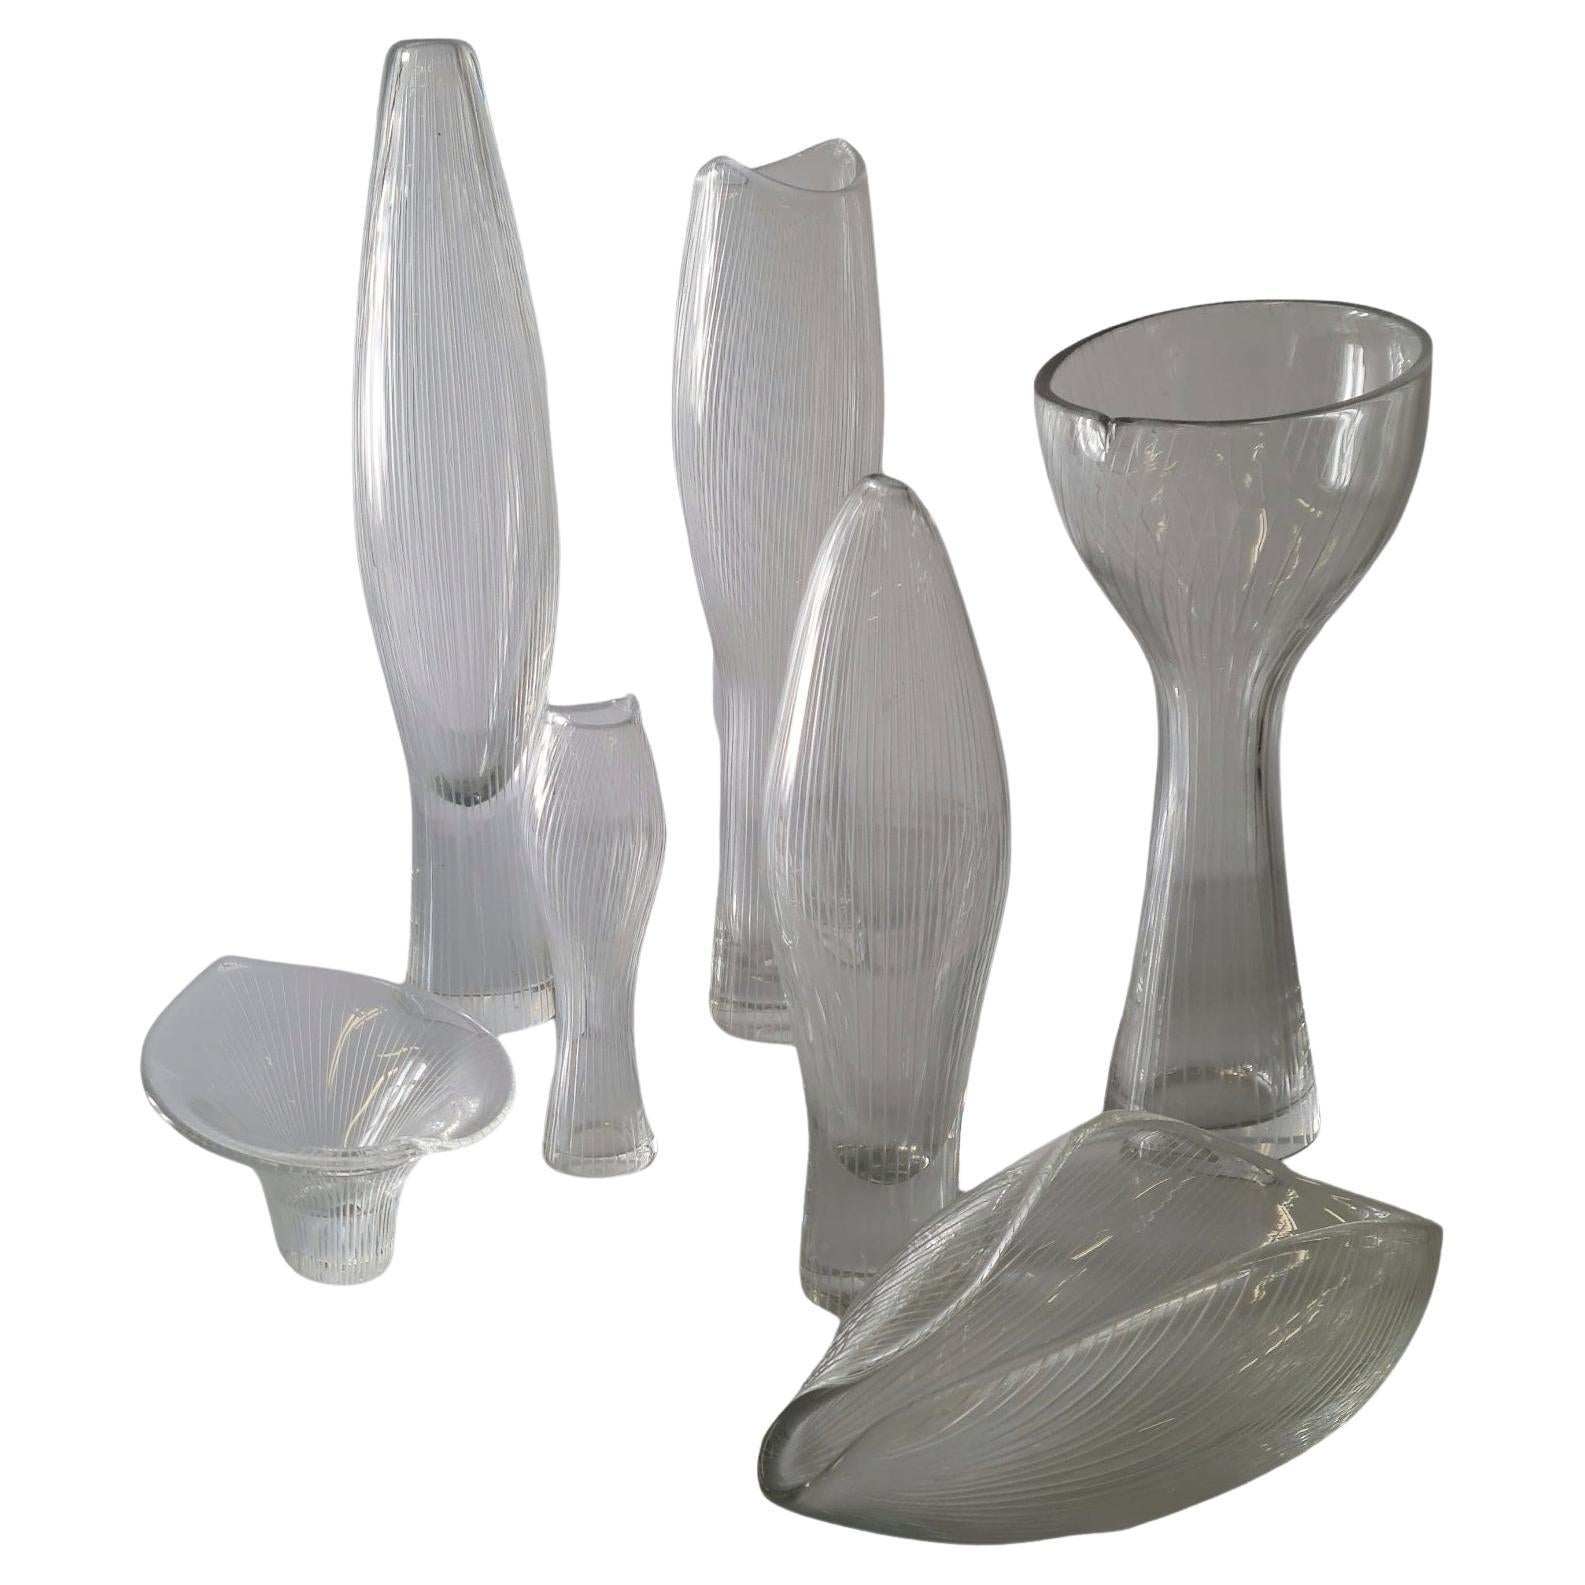 A Variety of Art Glass Objects by Tapio Wirkkala for Iittala, 1950s For Sale